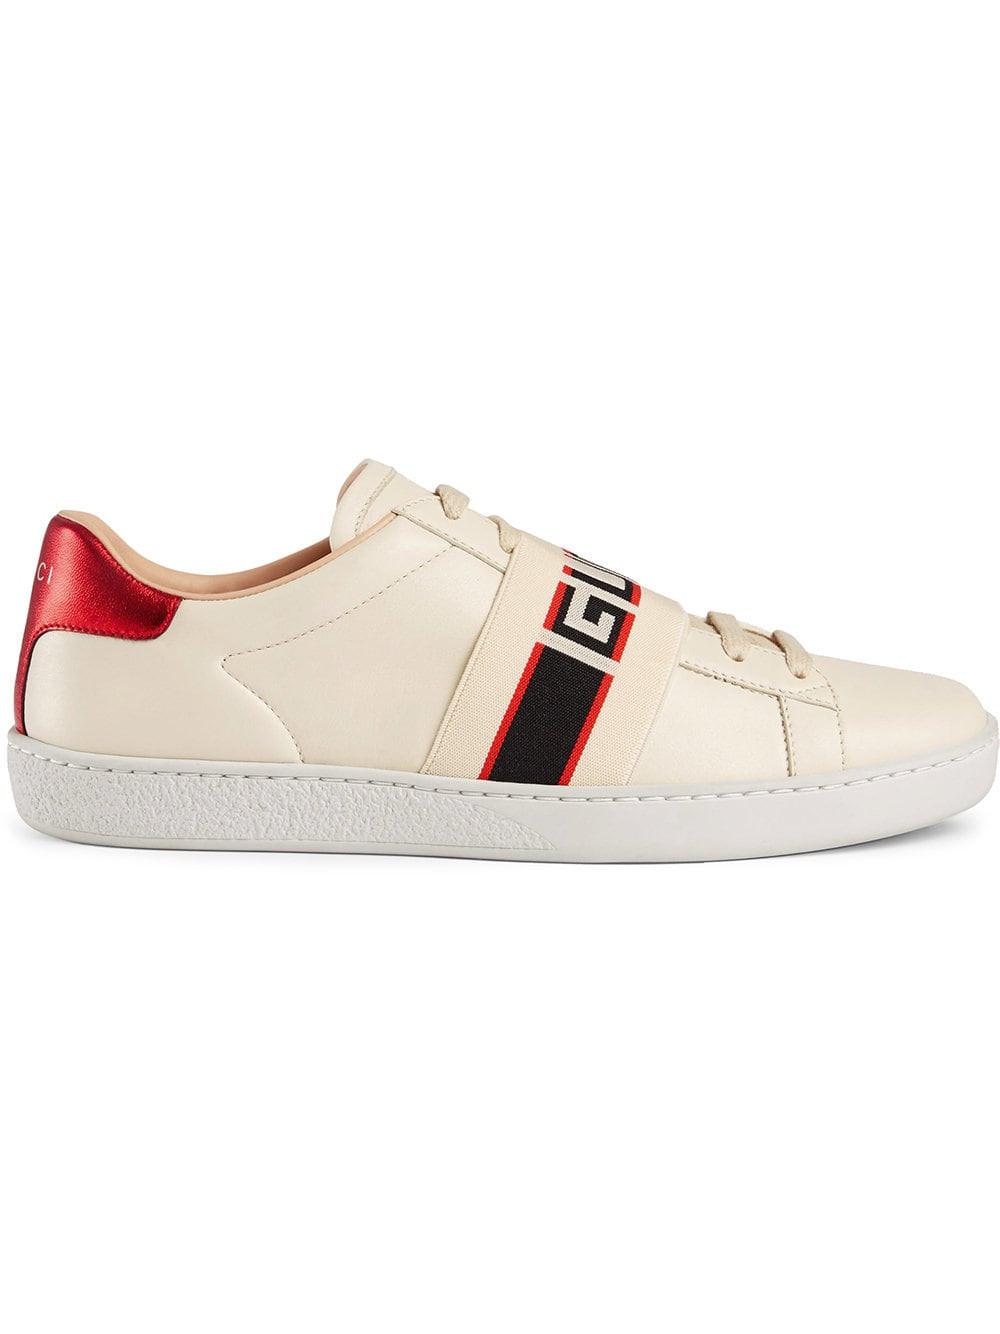 Gucci Ace Sneaker With Stripe | Lyst